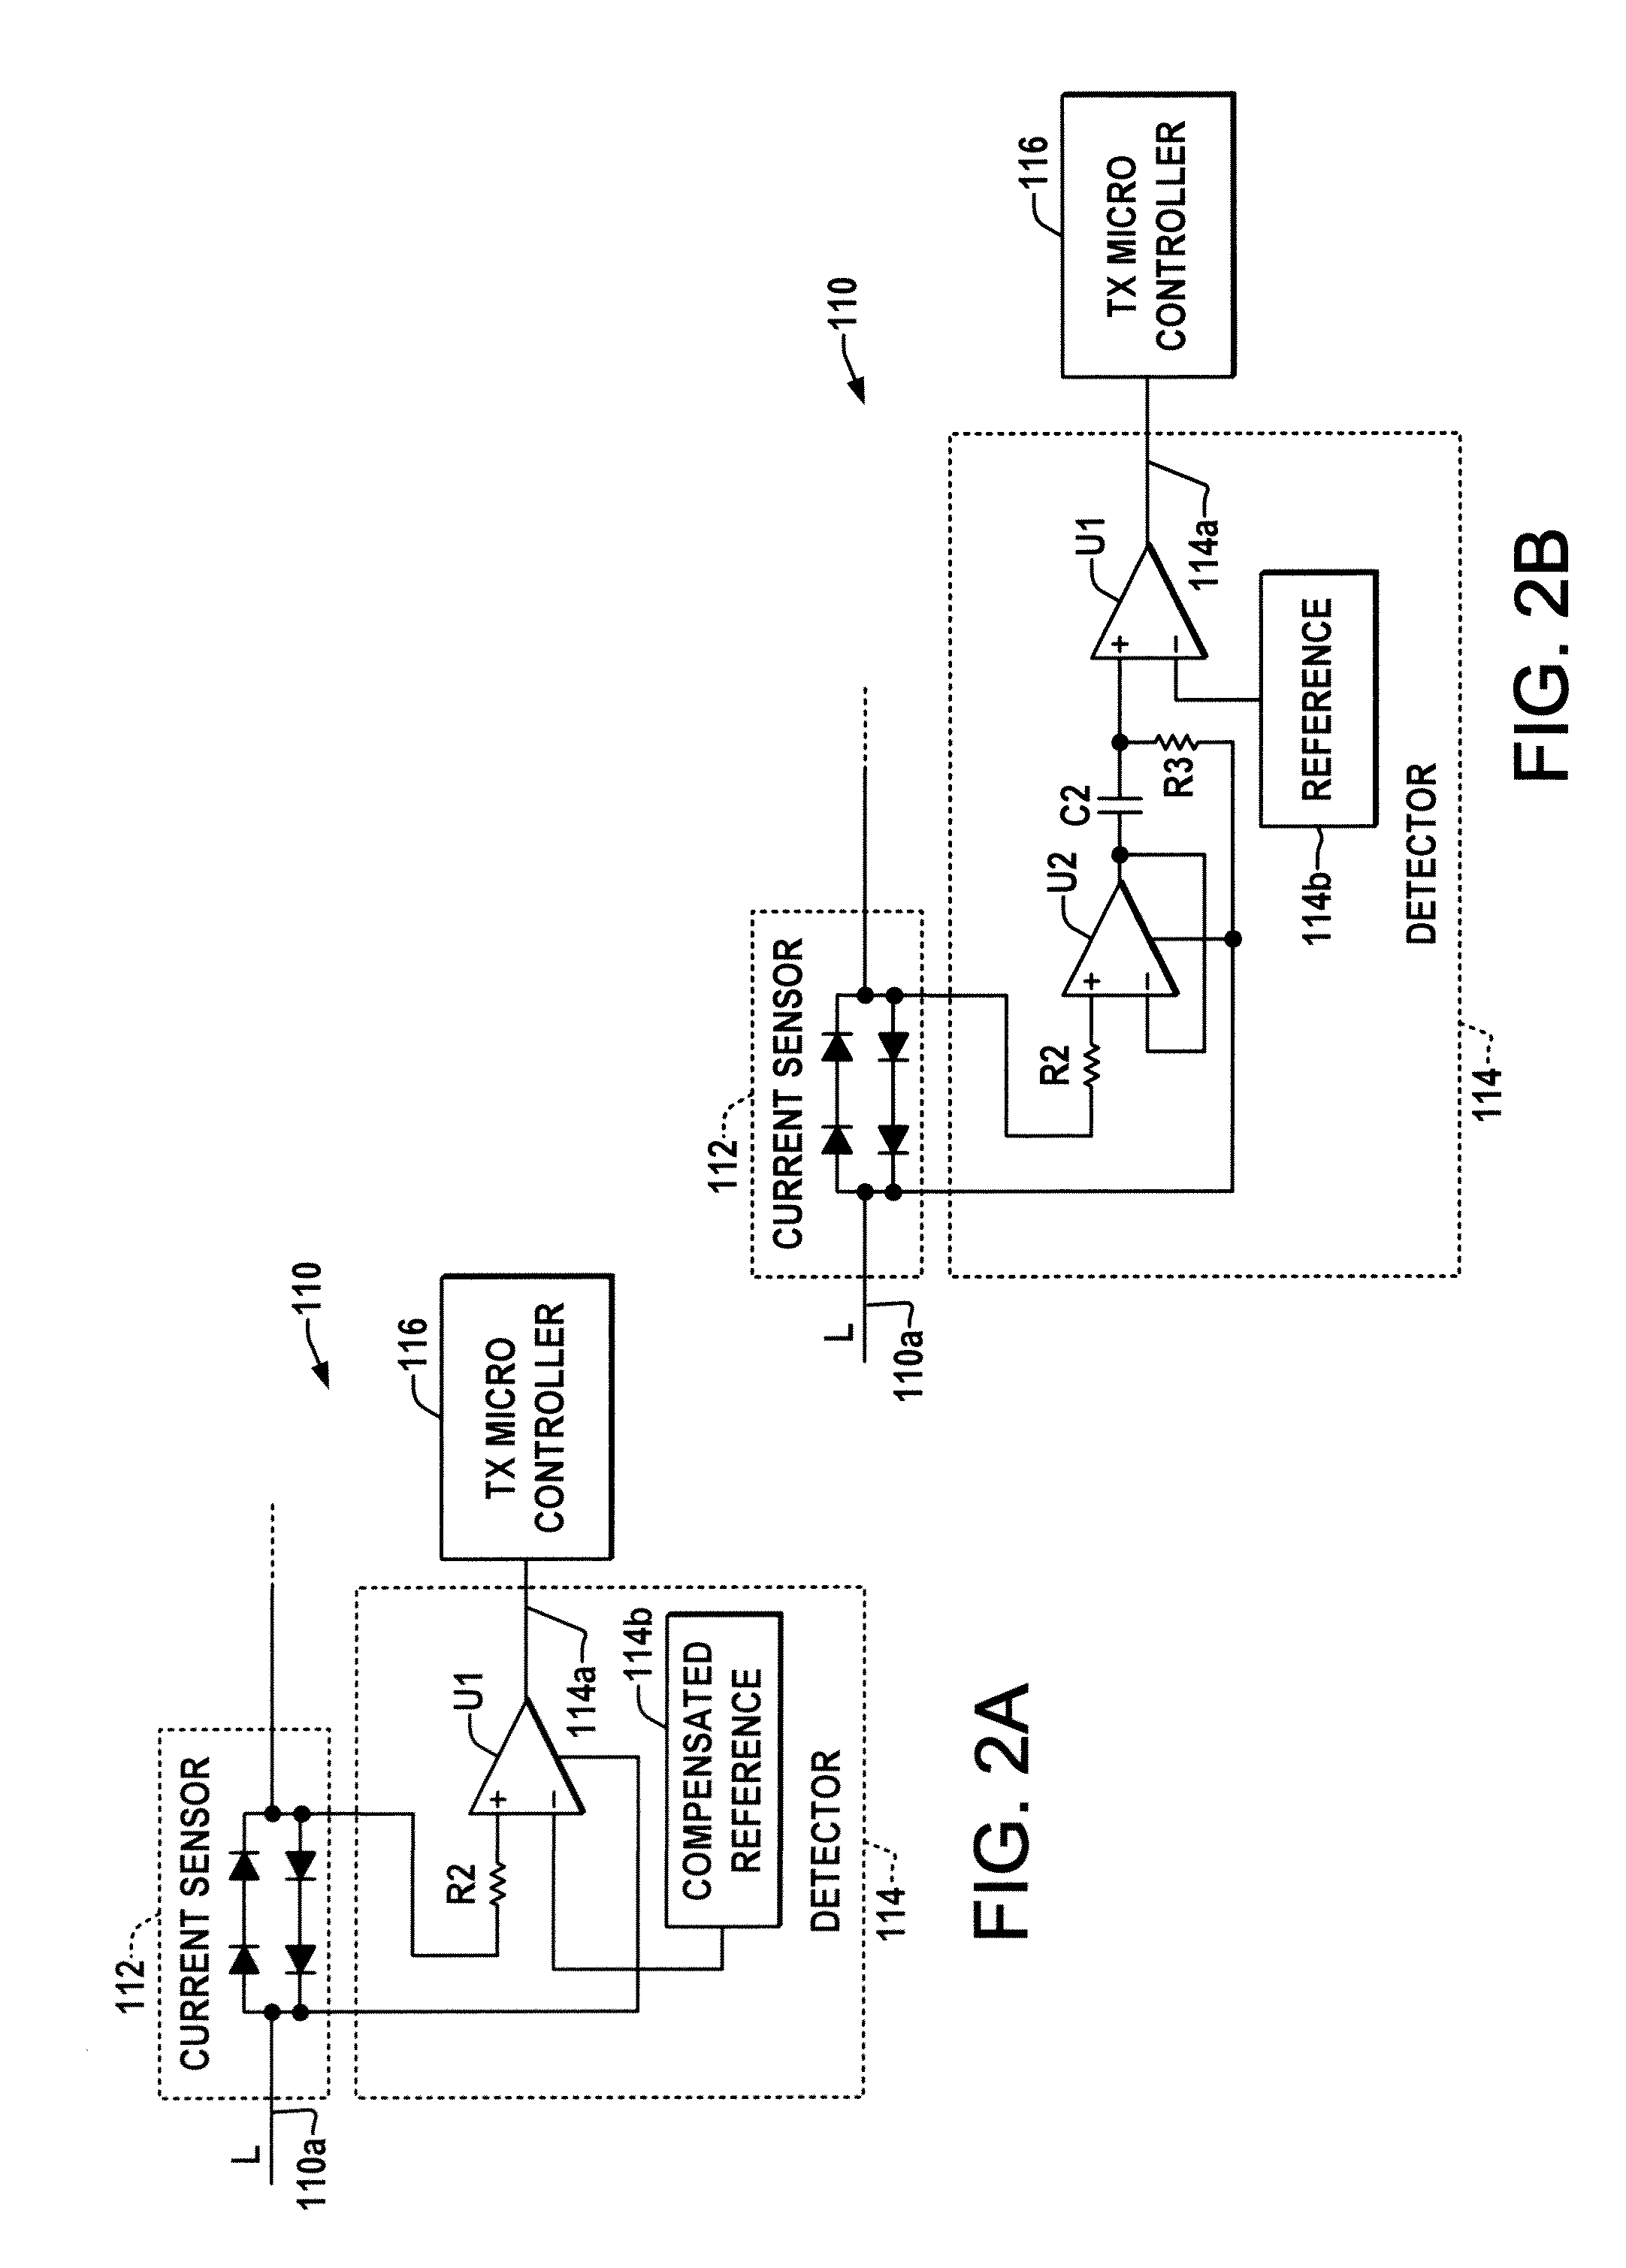 Apparatus for controlling integrated lighting ballasts in a series scheme